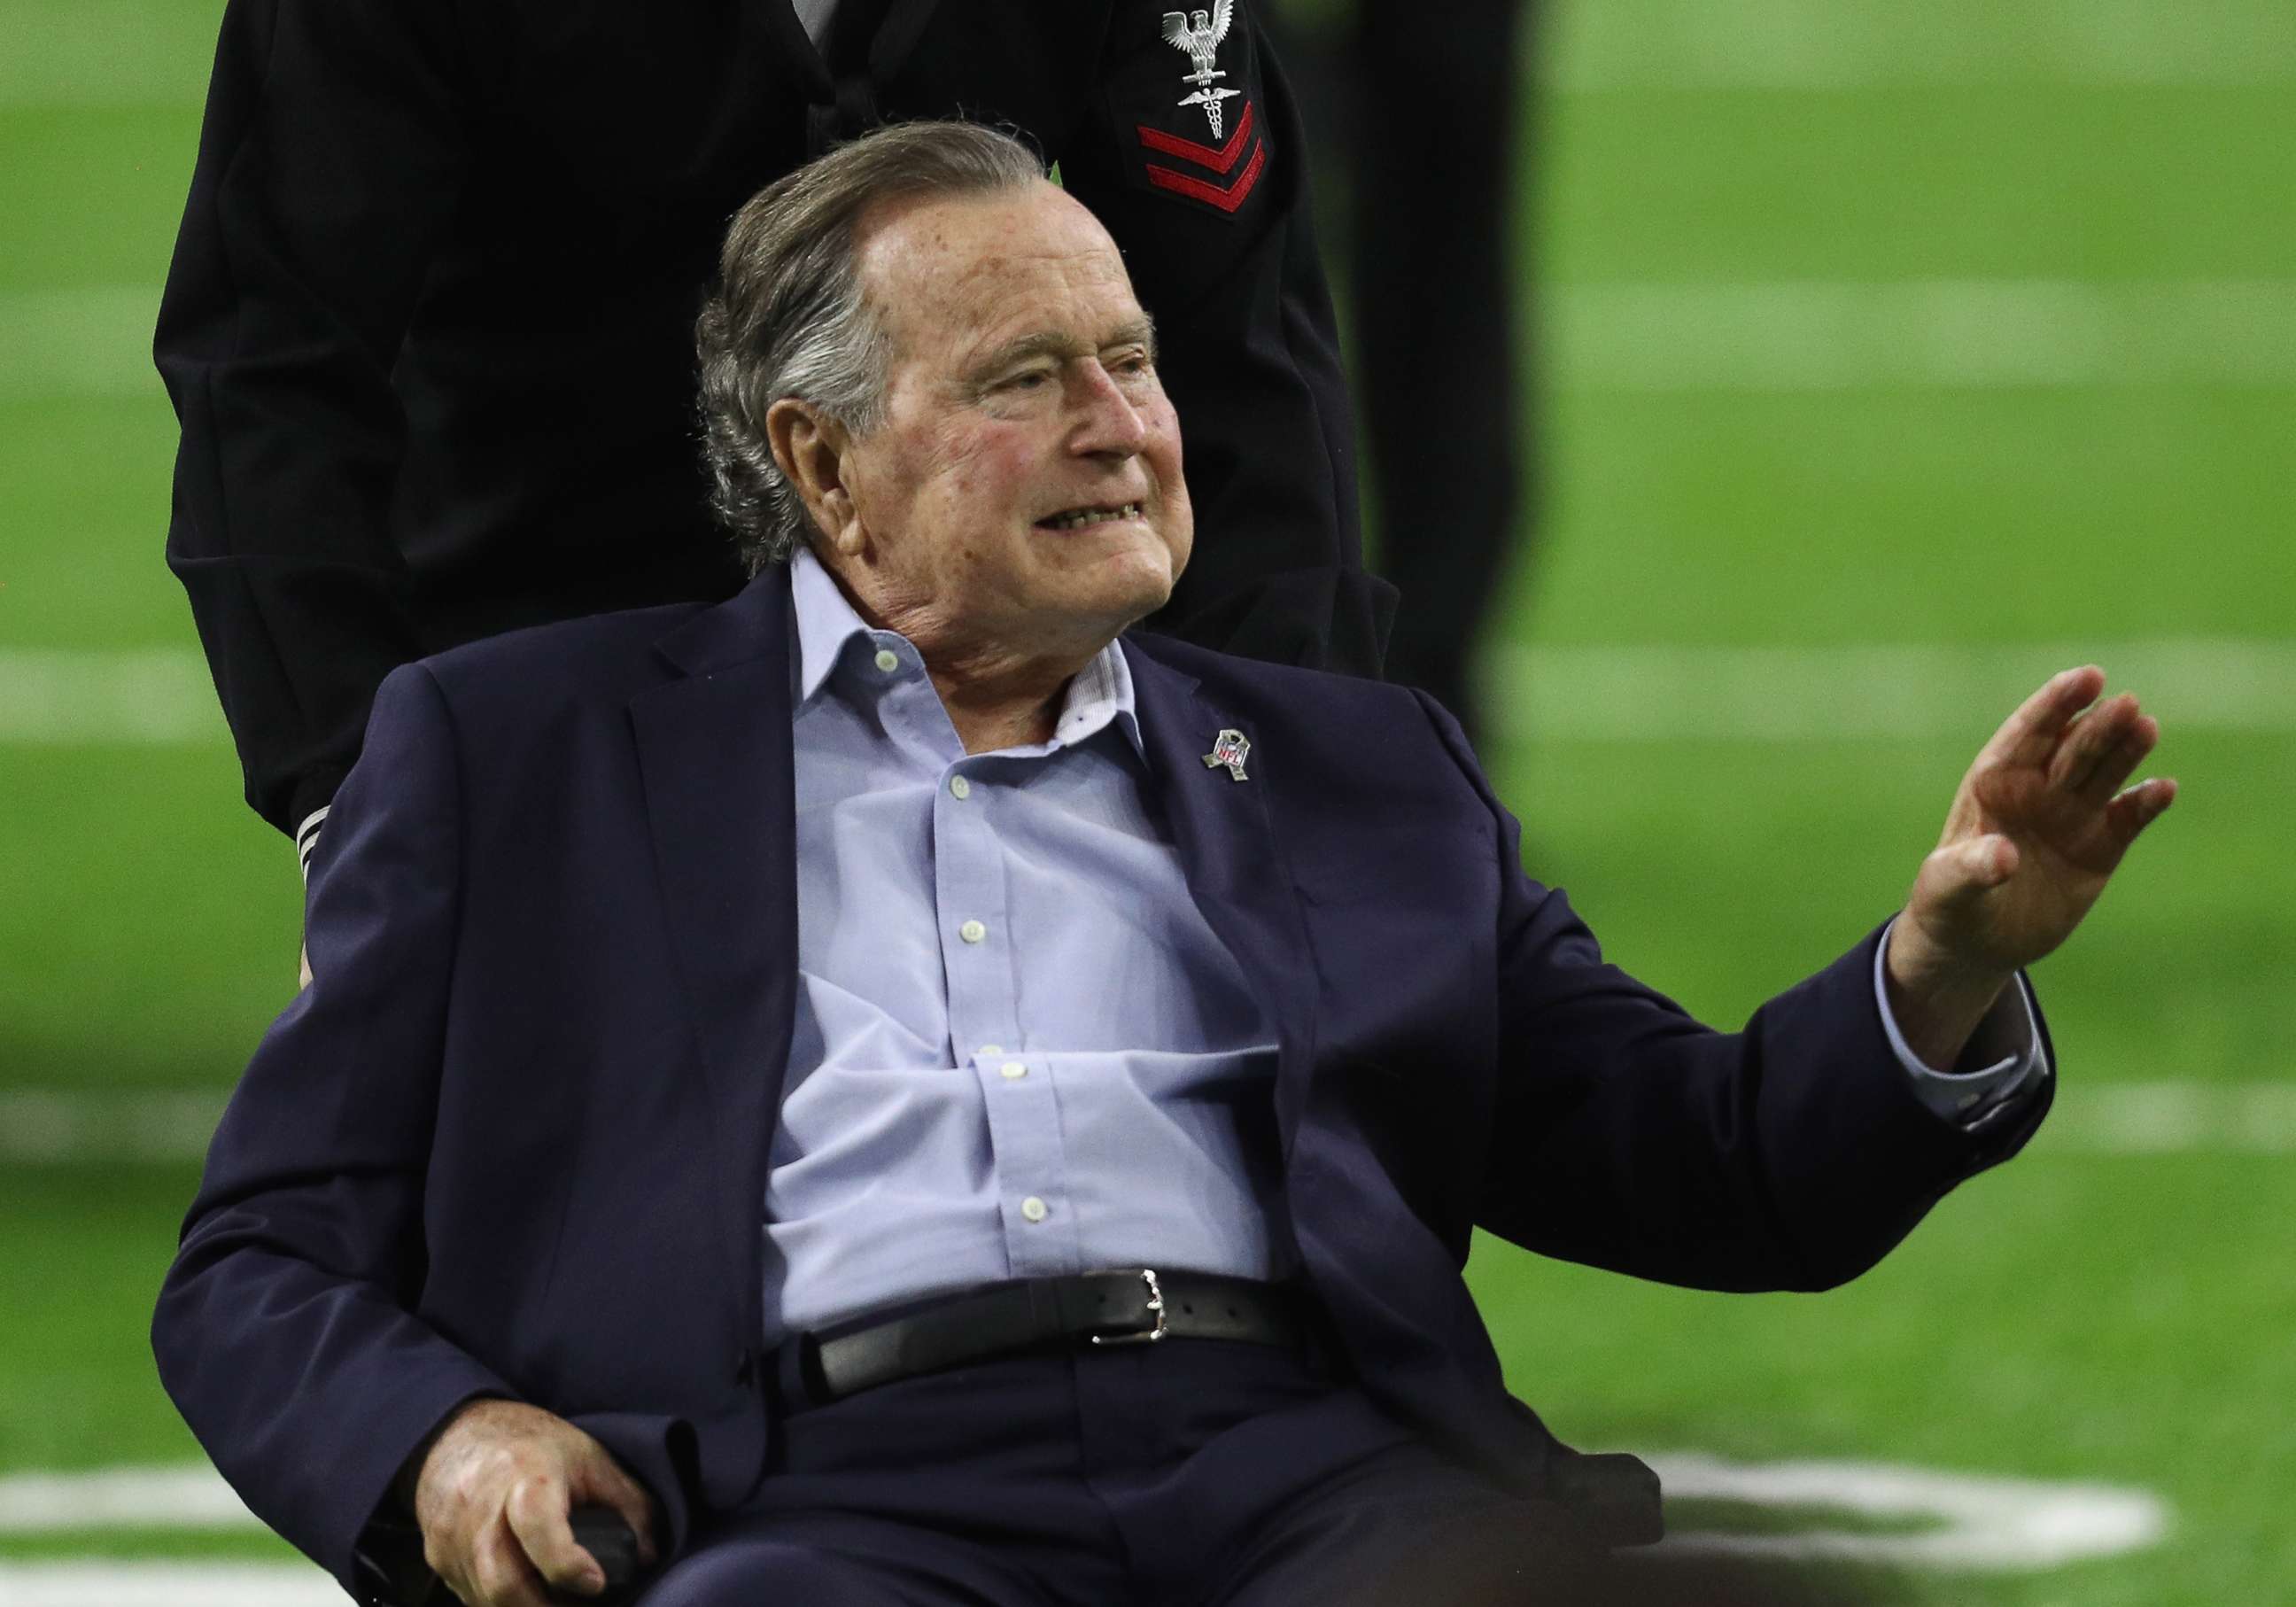 PHOTO: Former President George H.W. Bush arrives for the coin toss prior to Super Bowl 51 between the Atlanta Falcons and the New England Patriots at NRG Stadium on Feb. 5, 2017 in Houston, Texas.